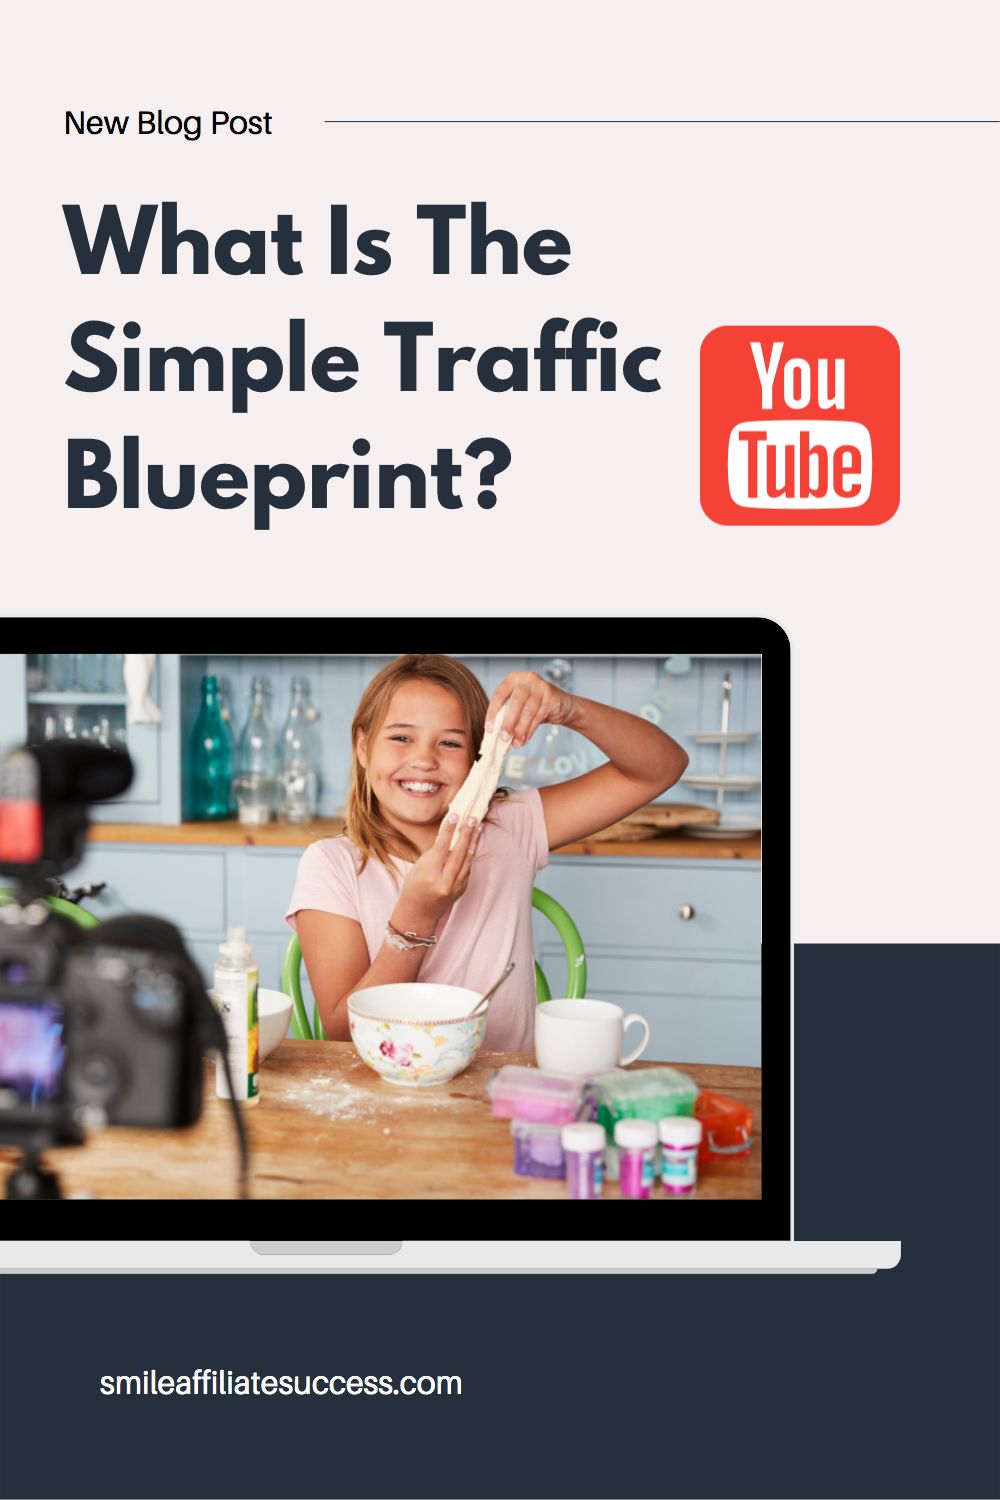 What Is The Simple Traffic Blueprint?